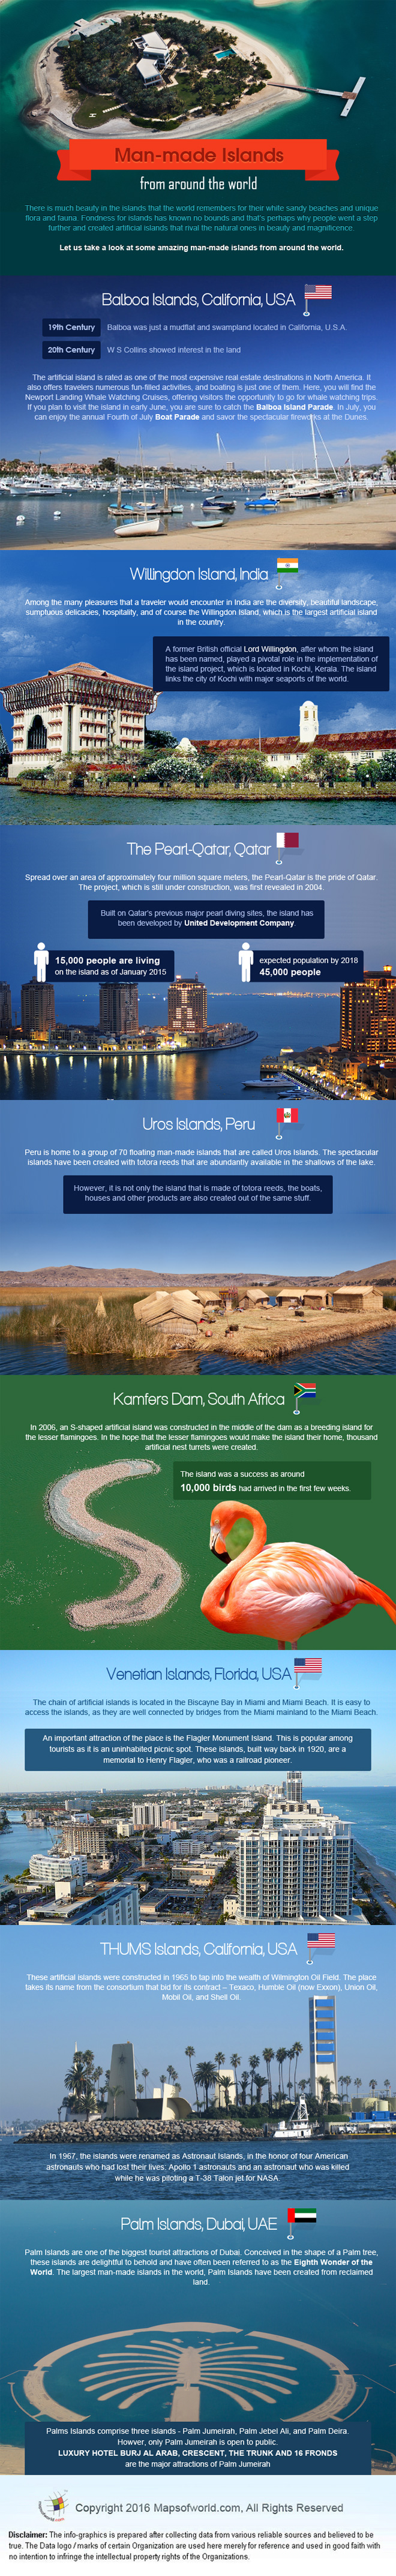 Infographic on Man-made islands